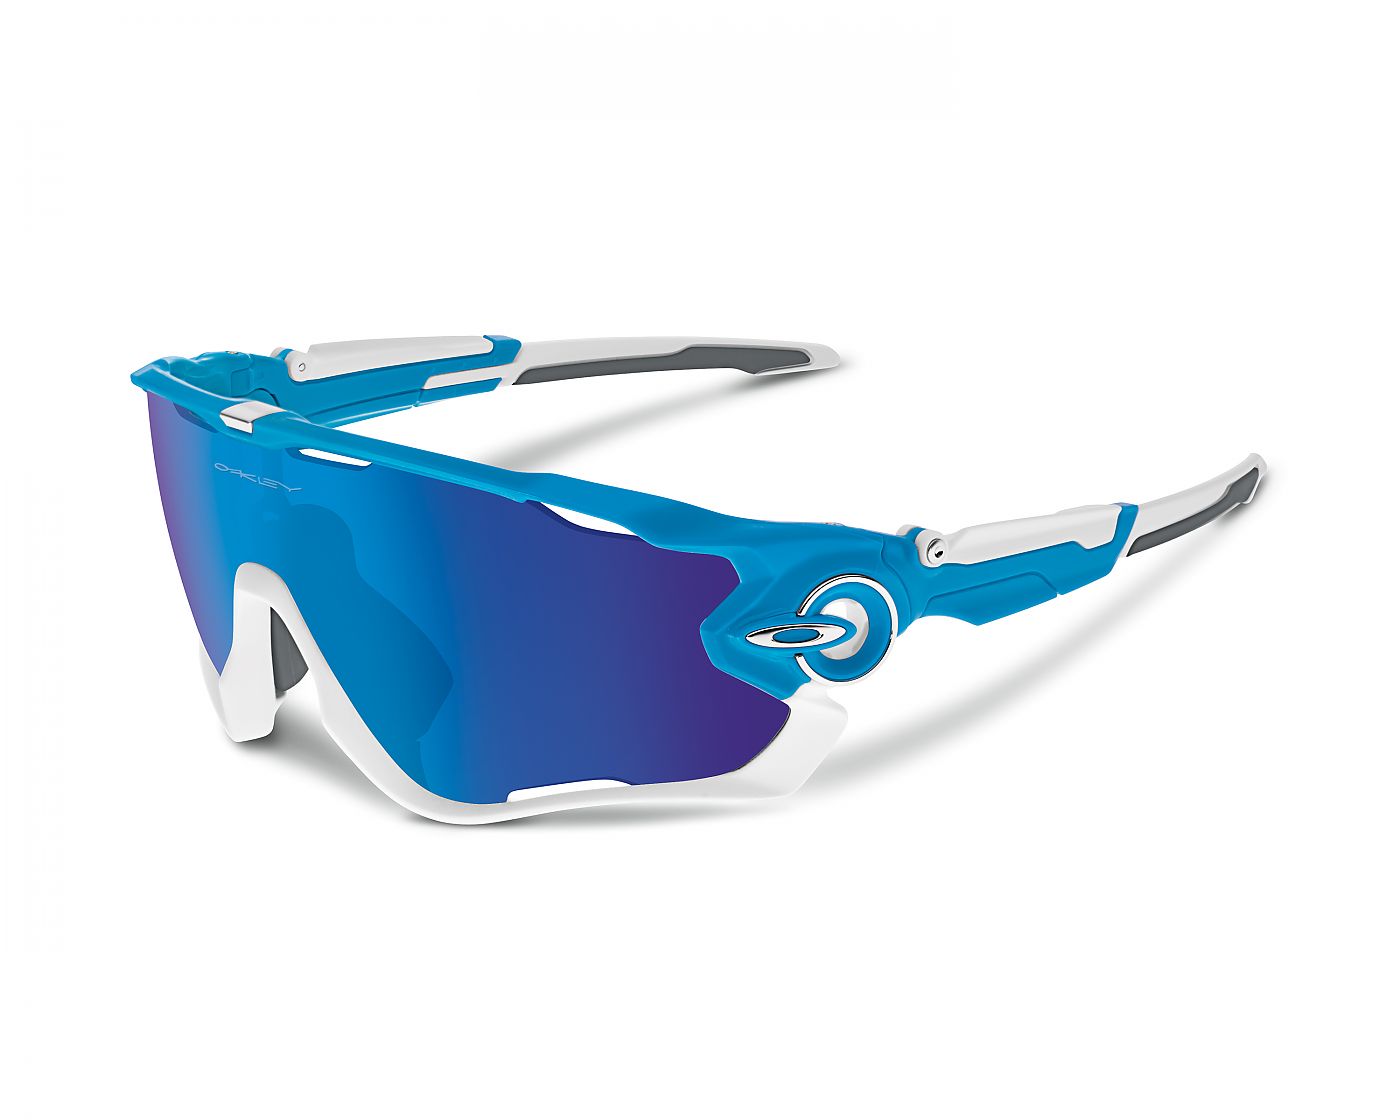 New Oakley Jawbreaker inspired by Mark Cavendish | Bicycle and Industry News